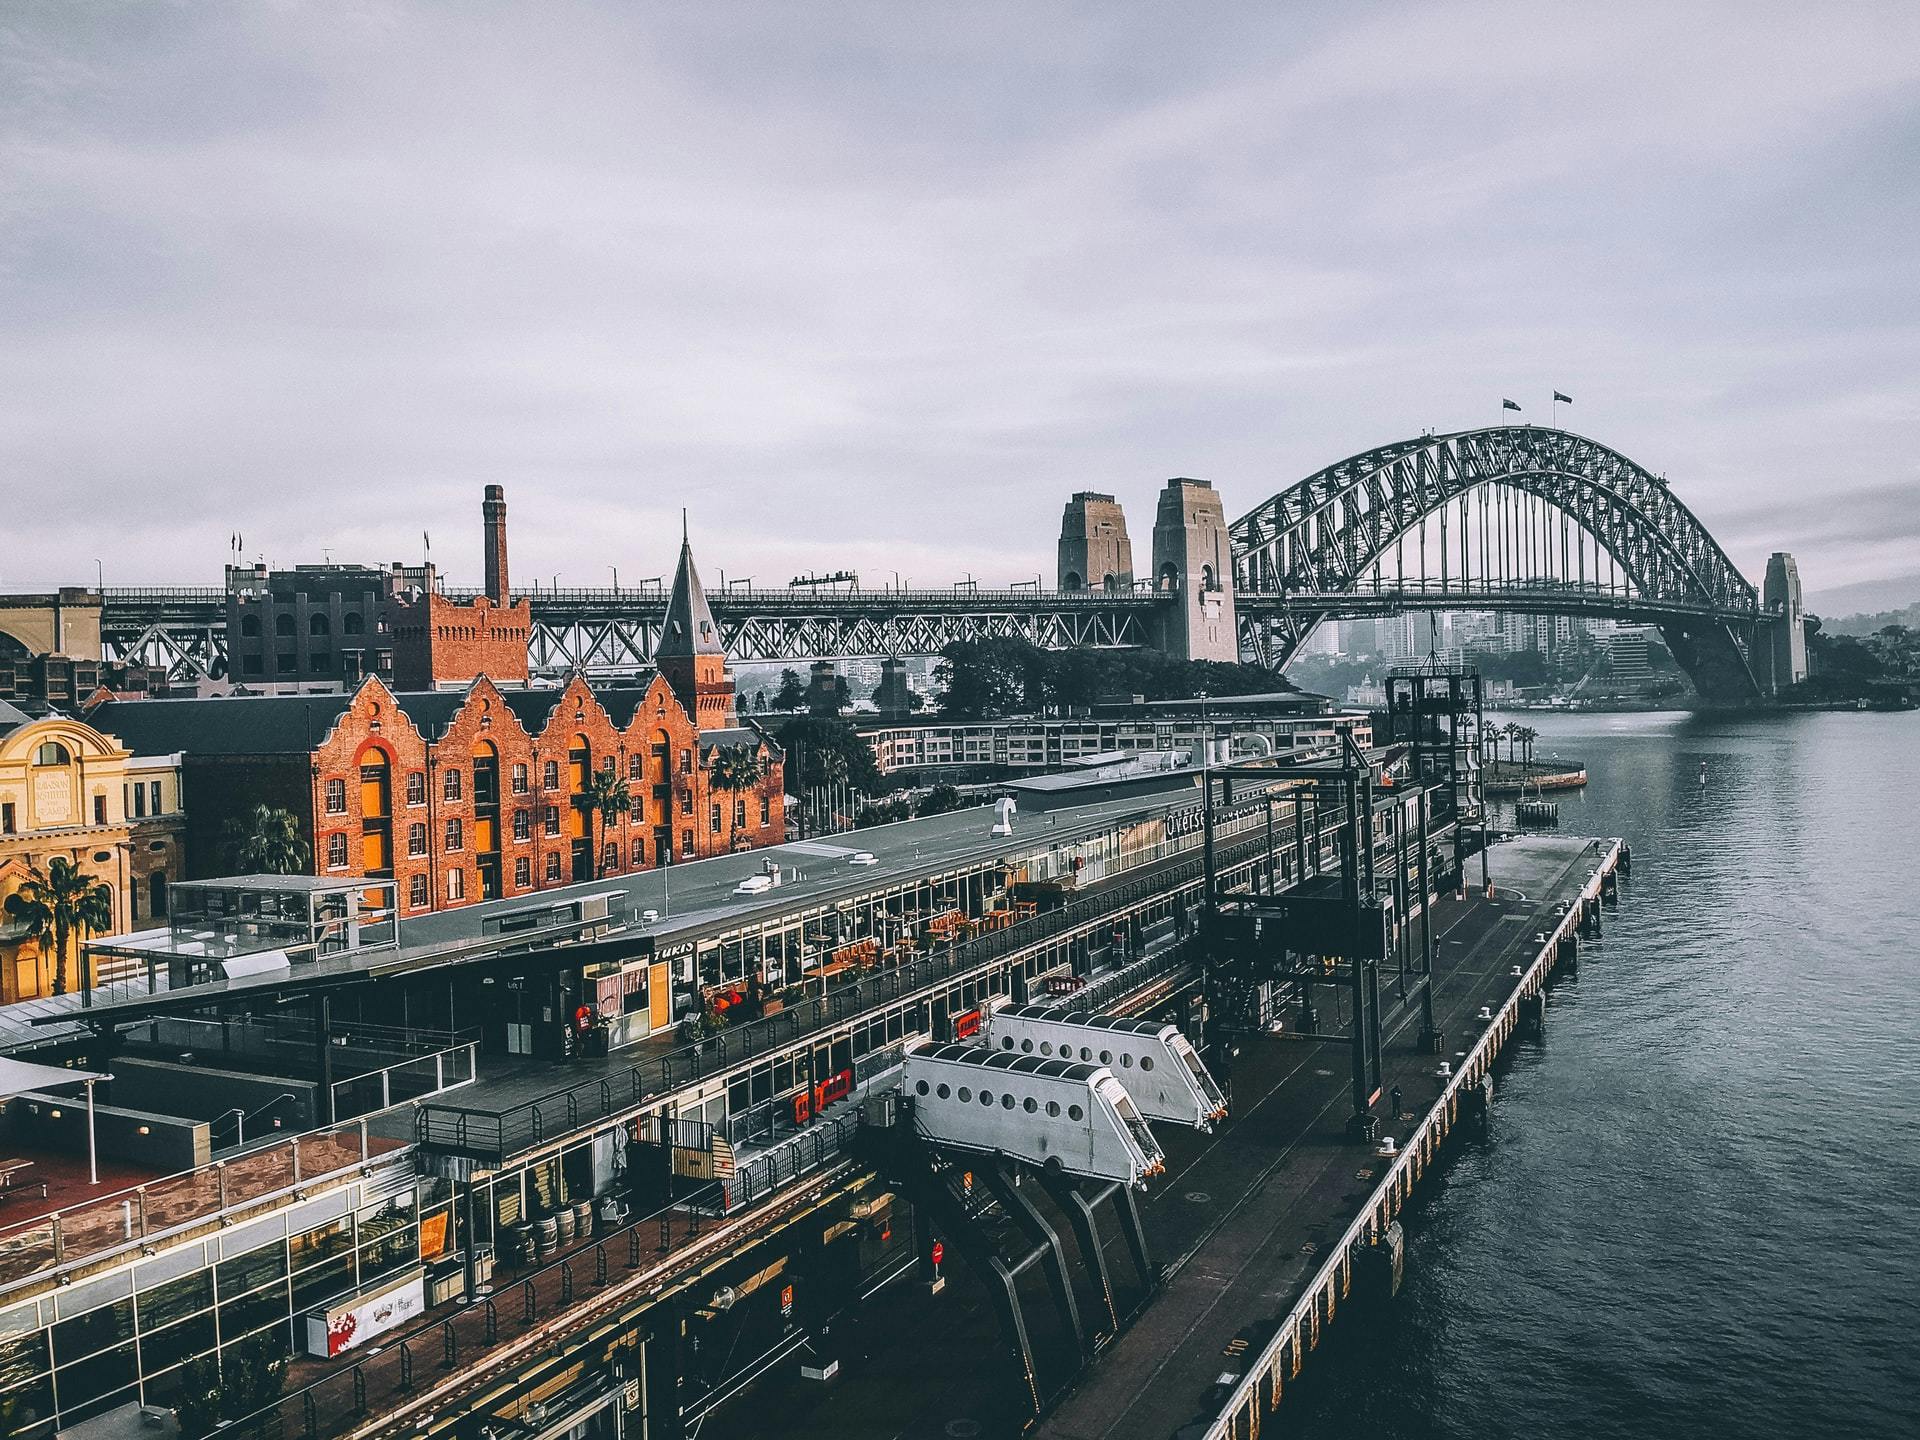 The City of Sydney has launched the third round of the Retail Innovation Program as part of a $72.5 million package to support small businesses through the COVID-19 pandemic.